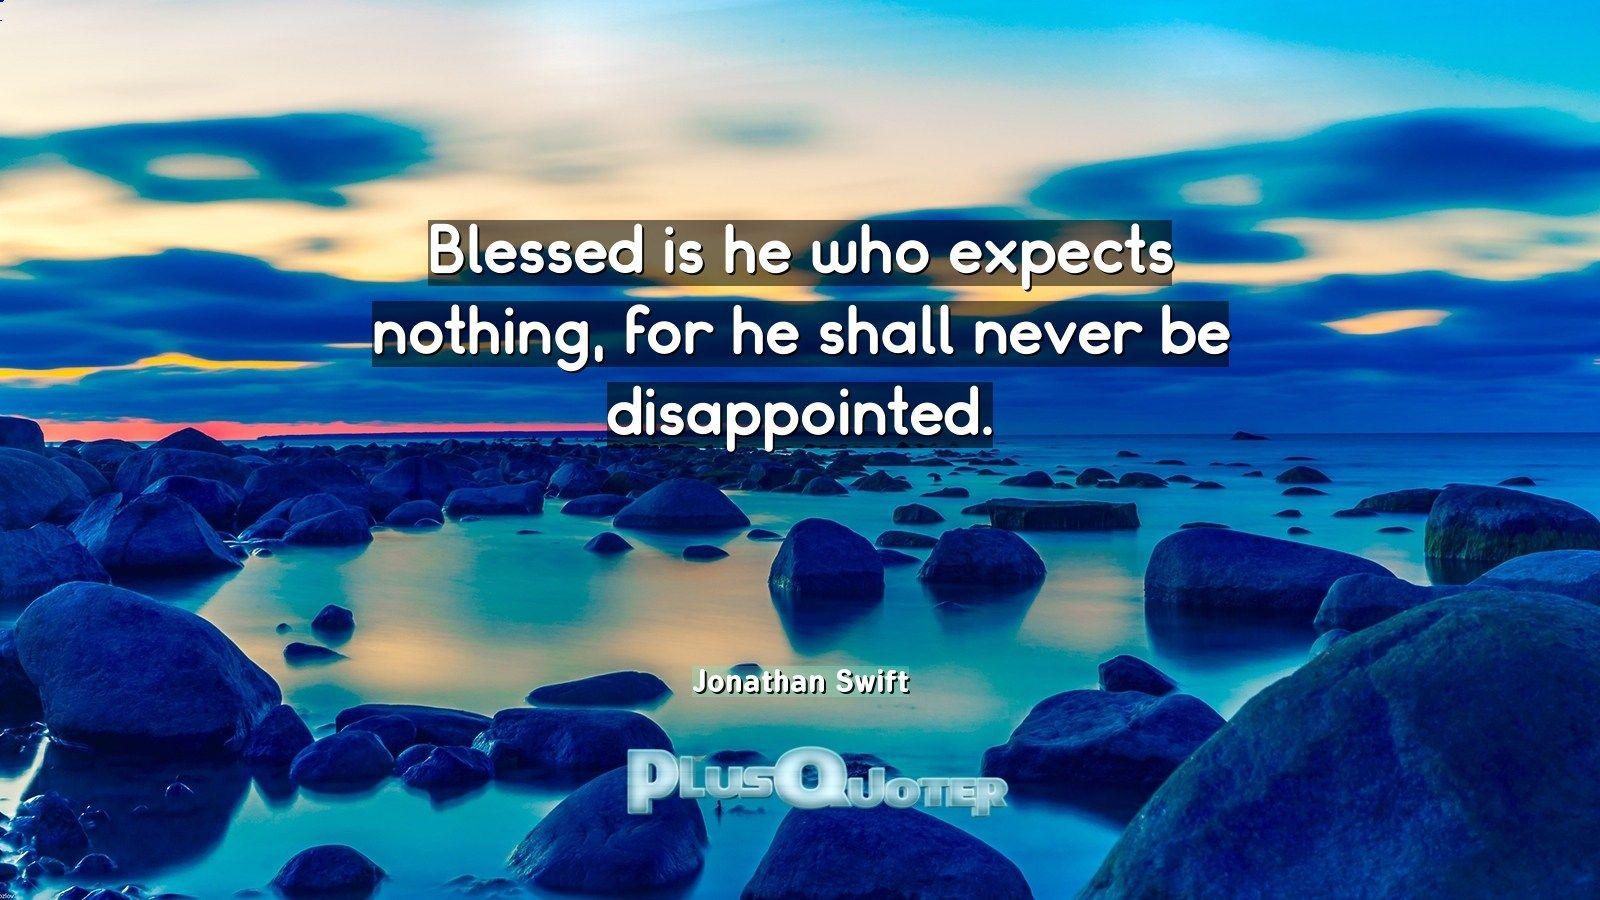 Blessed is he who expects nothing, for he shall never be